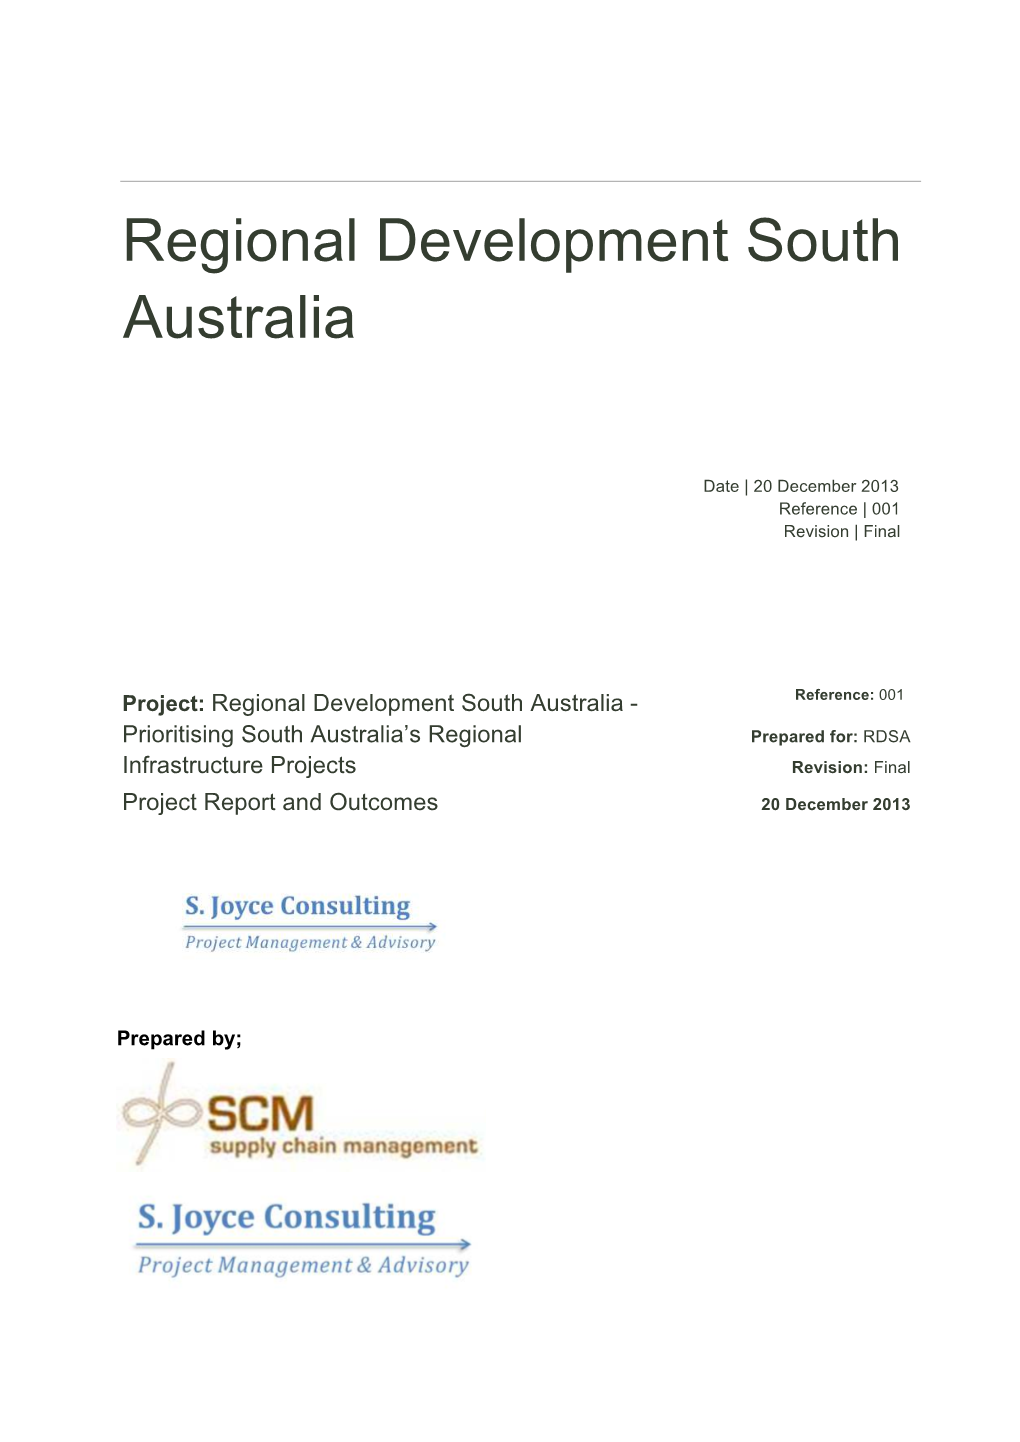 Prioritising South Australia's Regional Infrastructure Projects